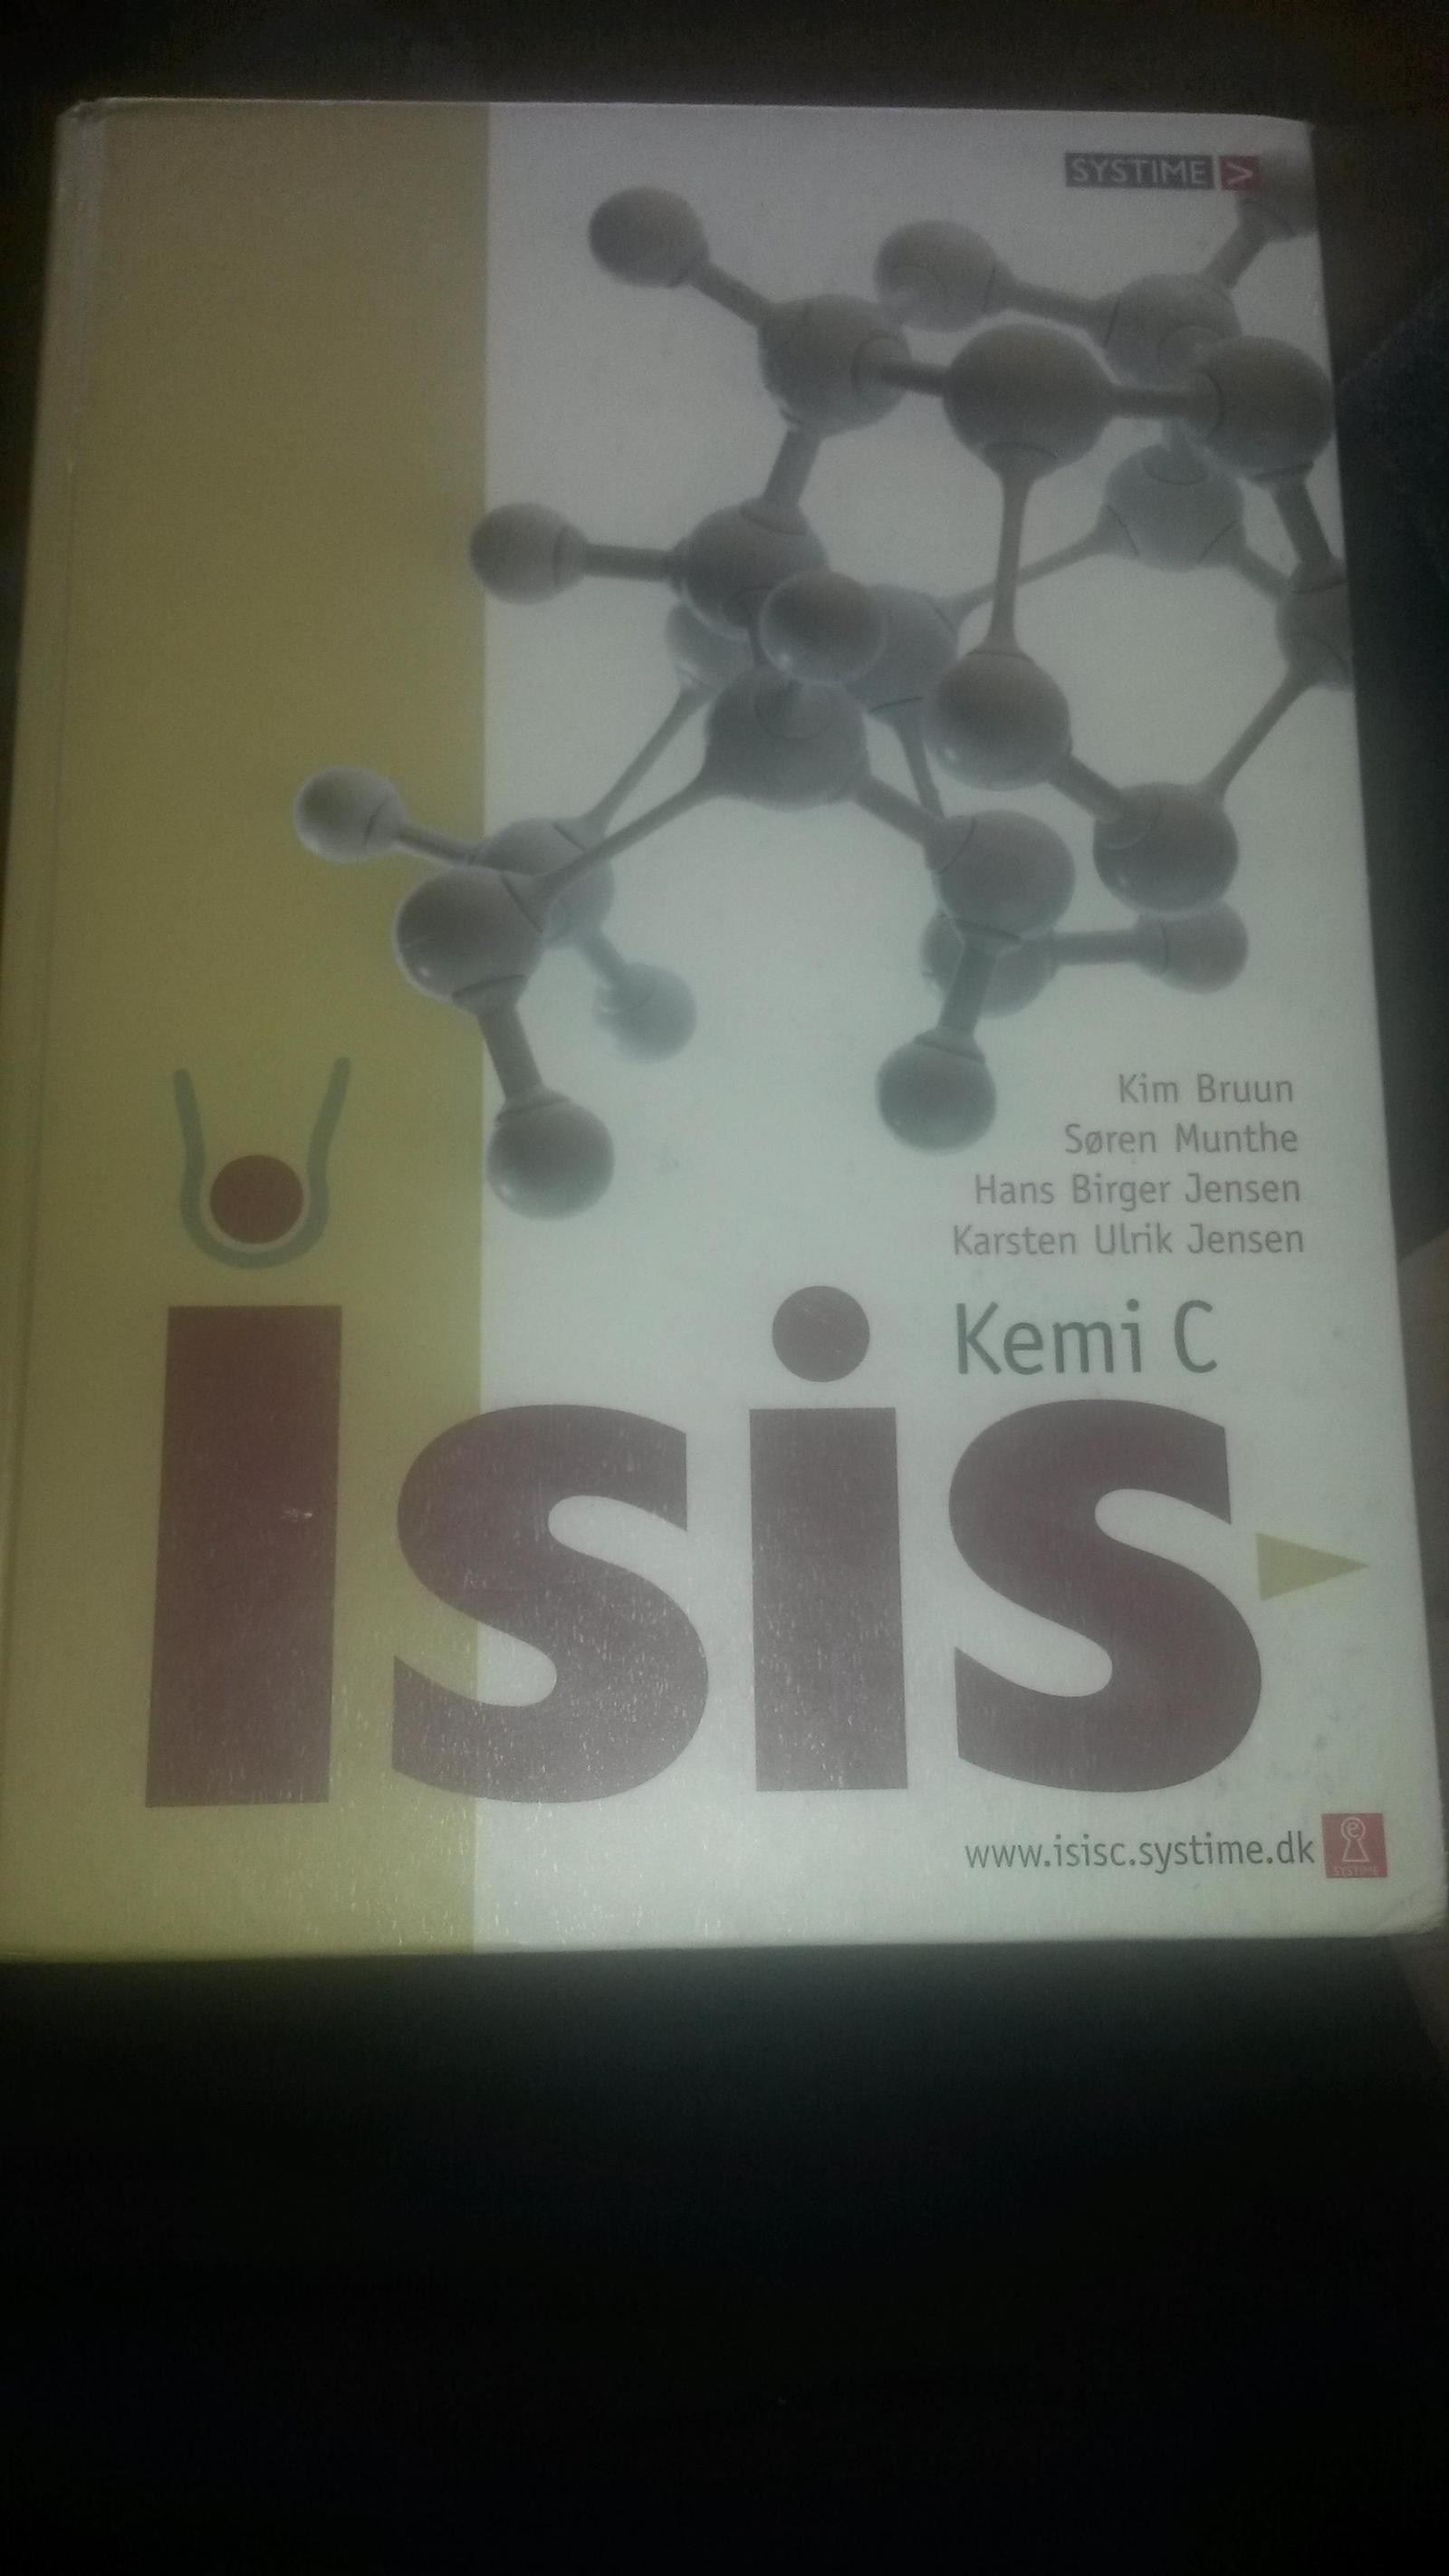 I'd rather not read such a textbook on chemistry ... - Chemistry, League of chemists, ISIS, Imgur